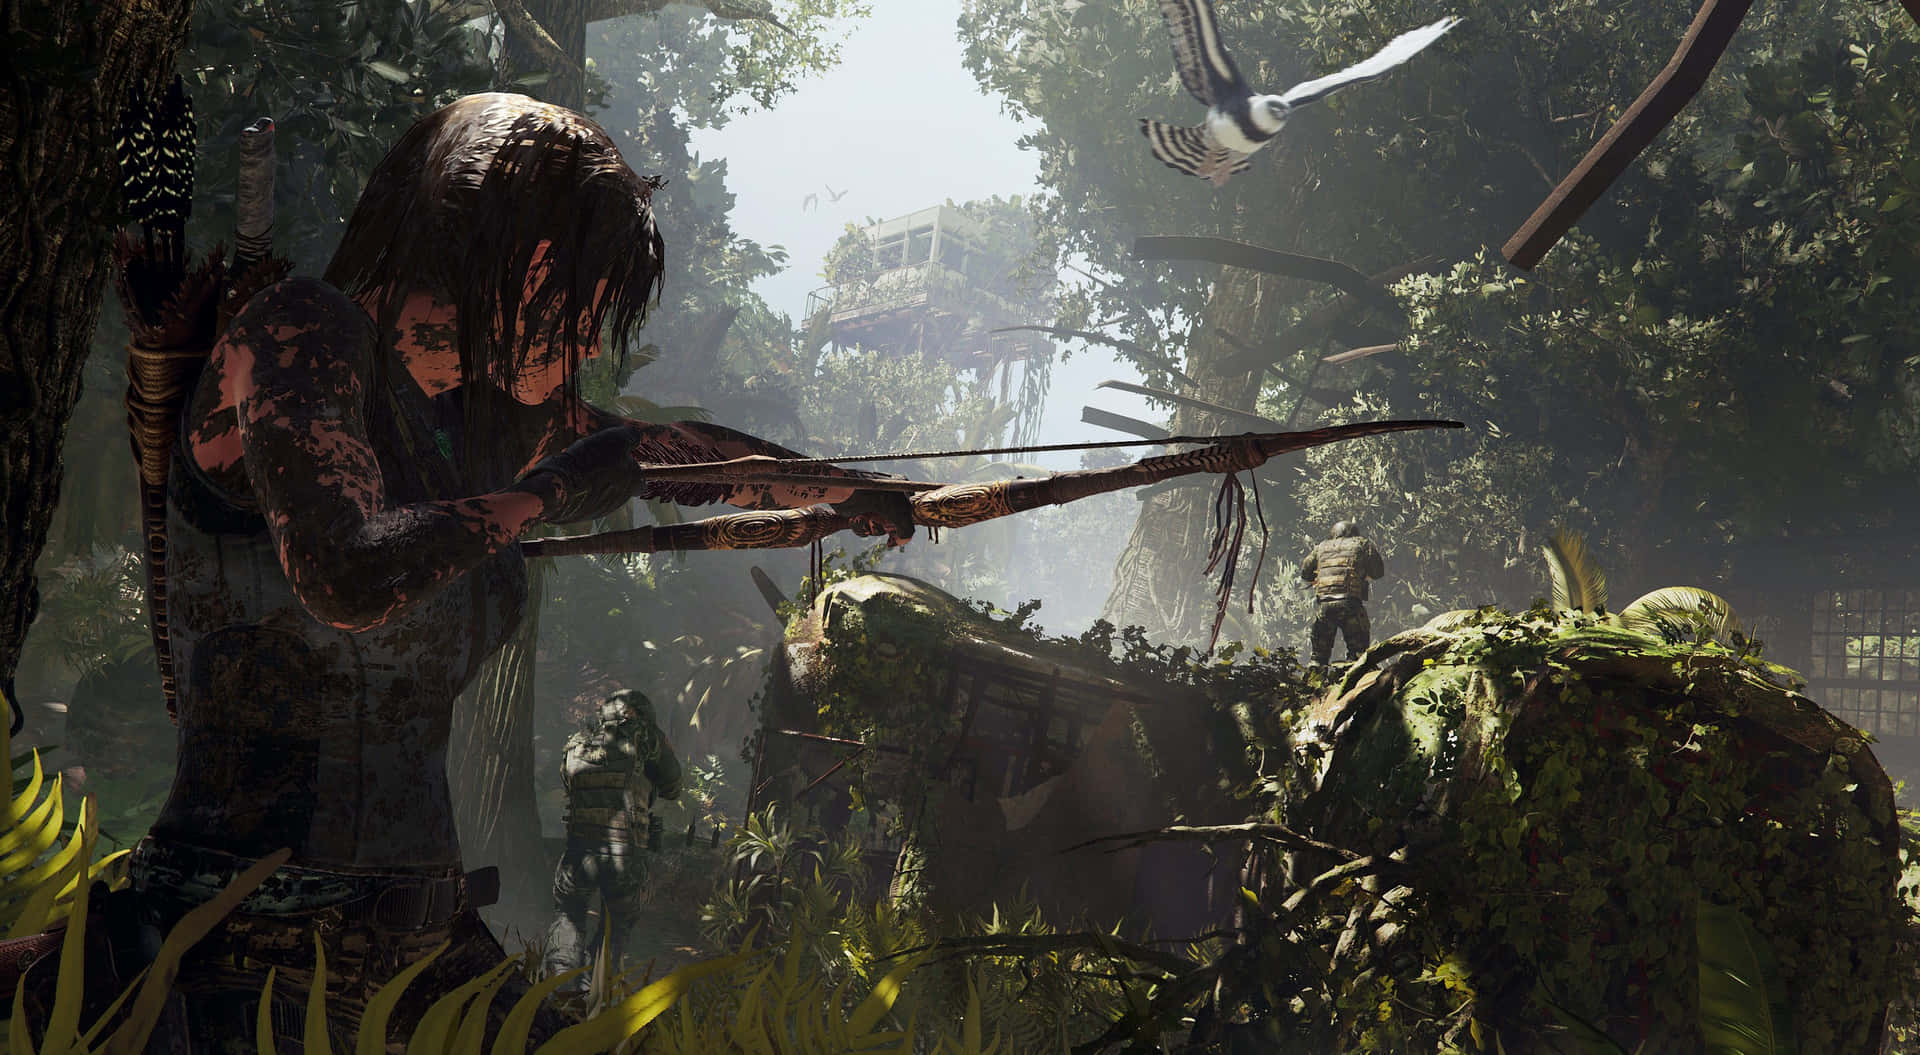 Lara Croft Takes Action In Shadow Of The Tomb Raider